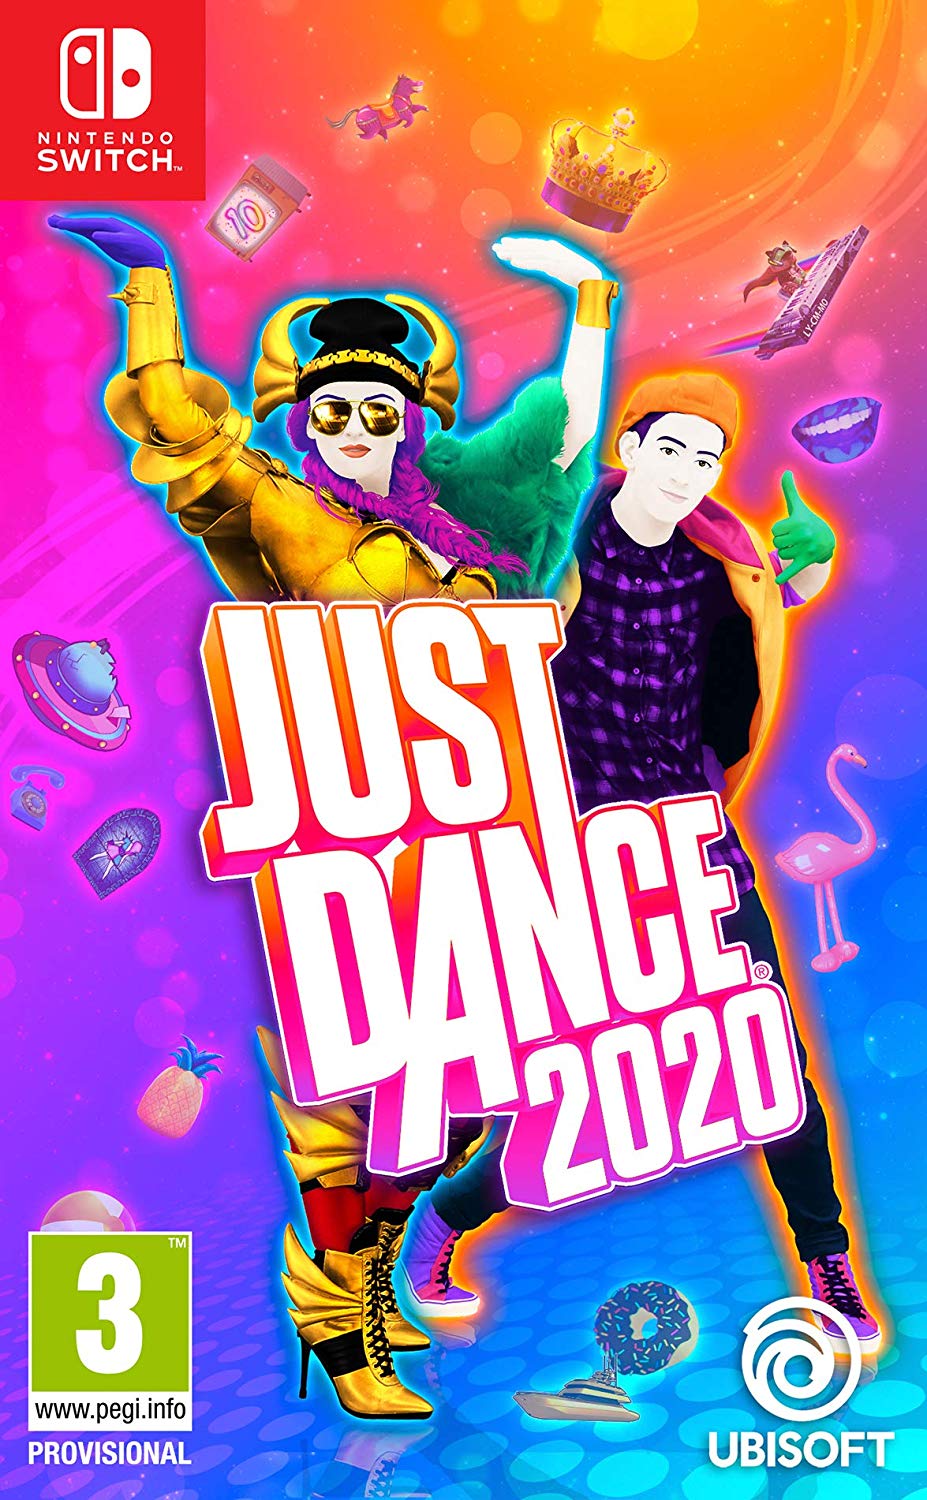 Just Dance 2020 - Game Nintendo Switch